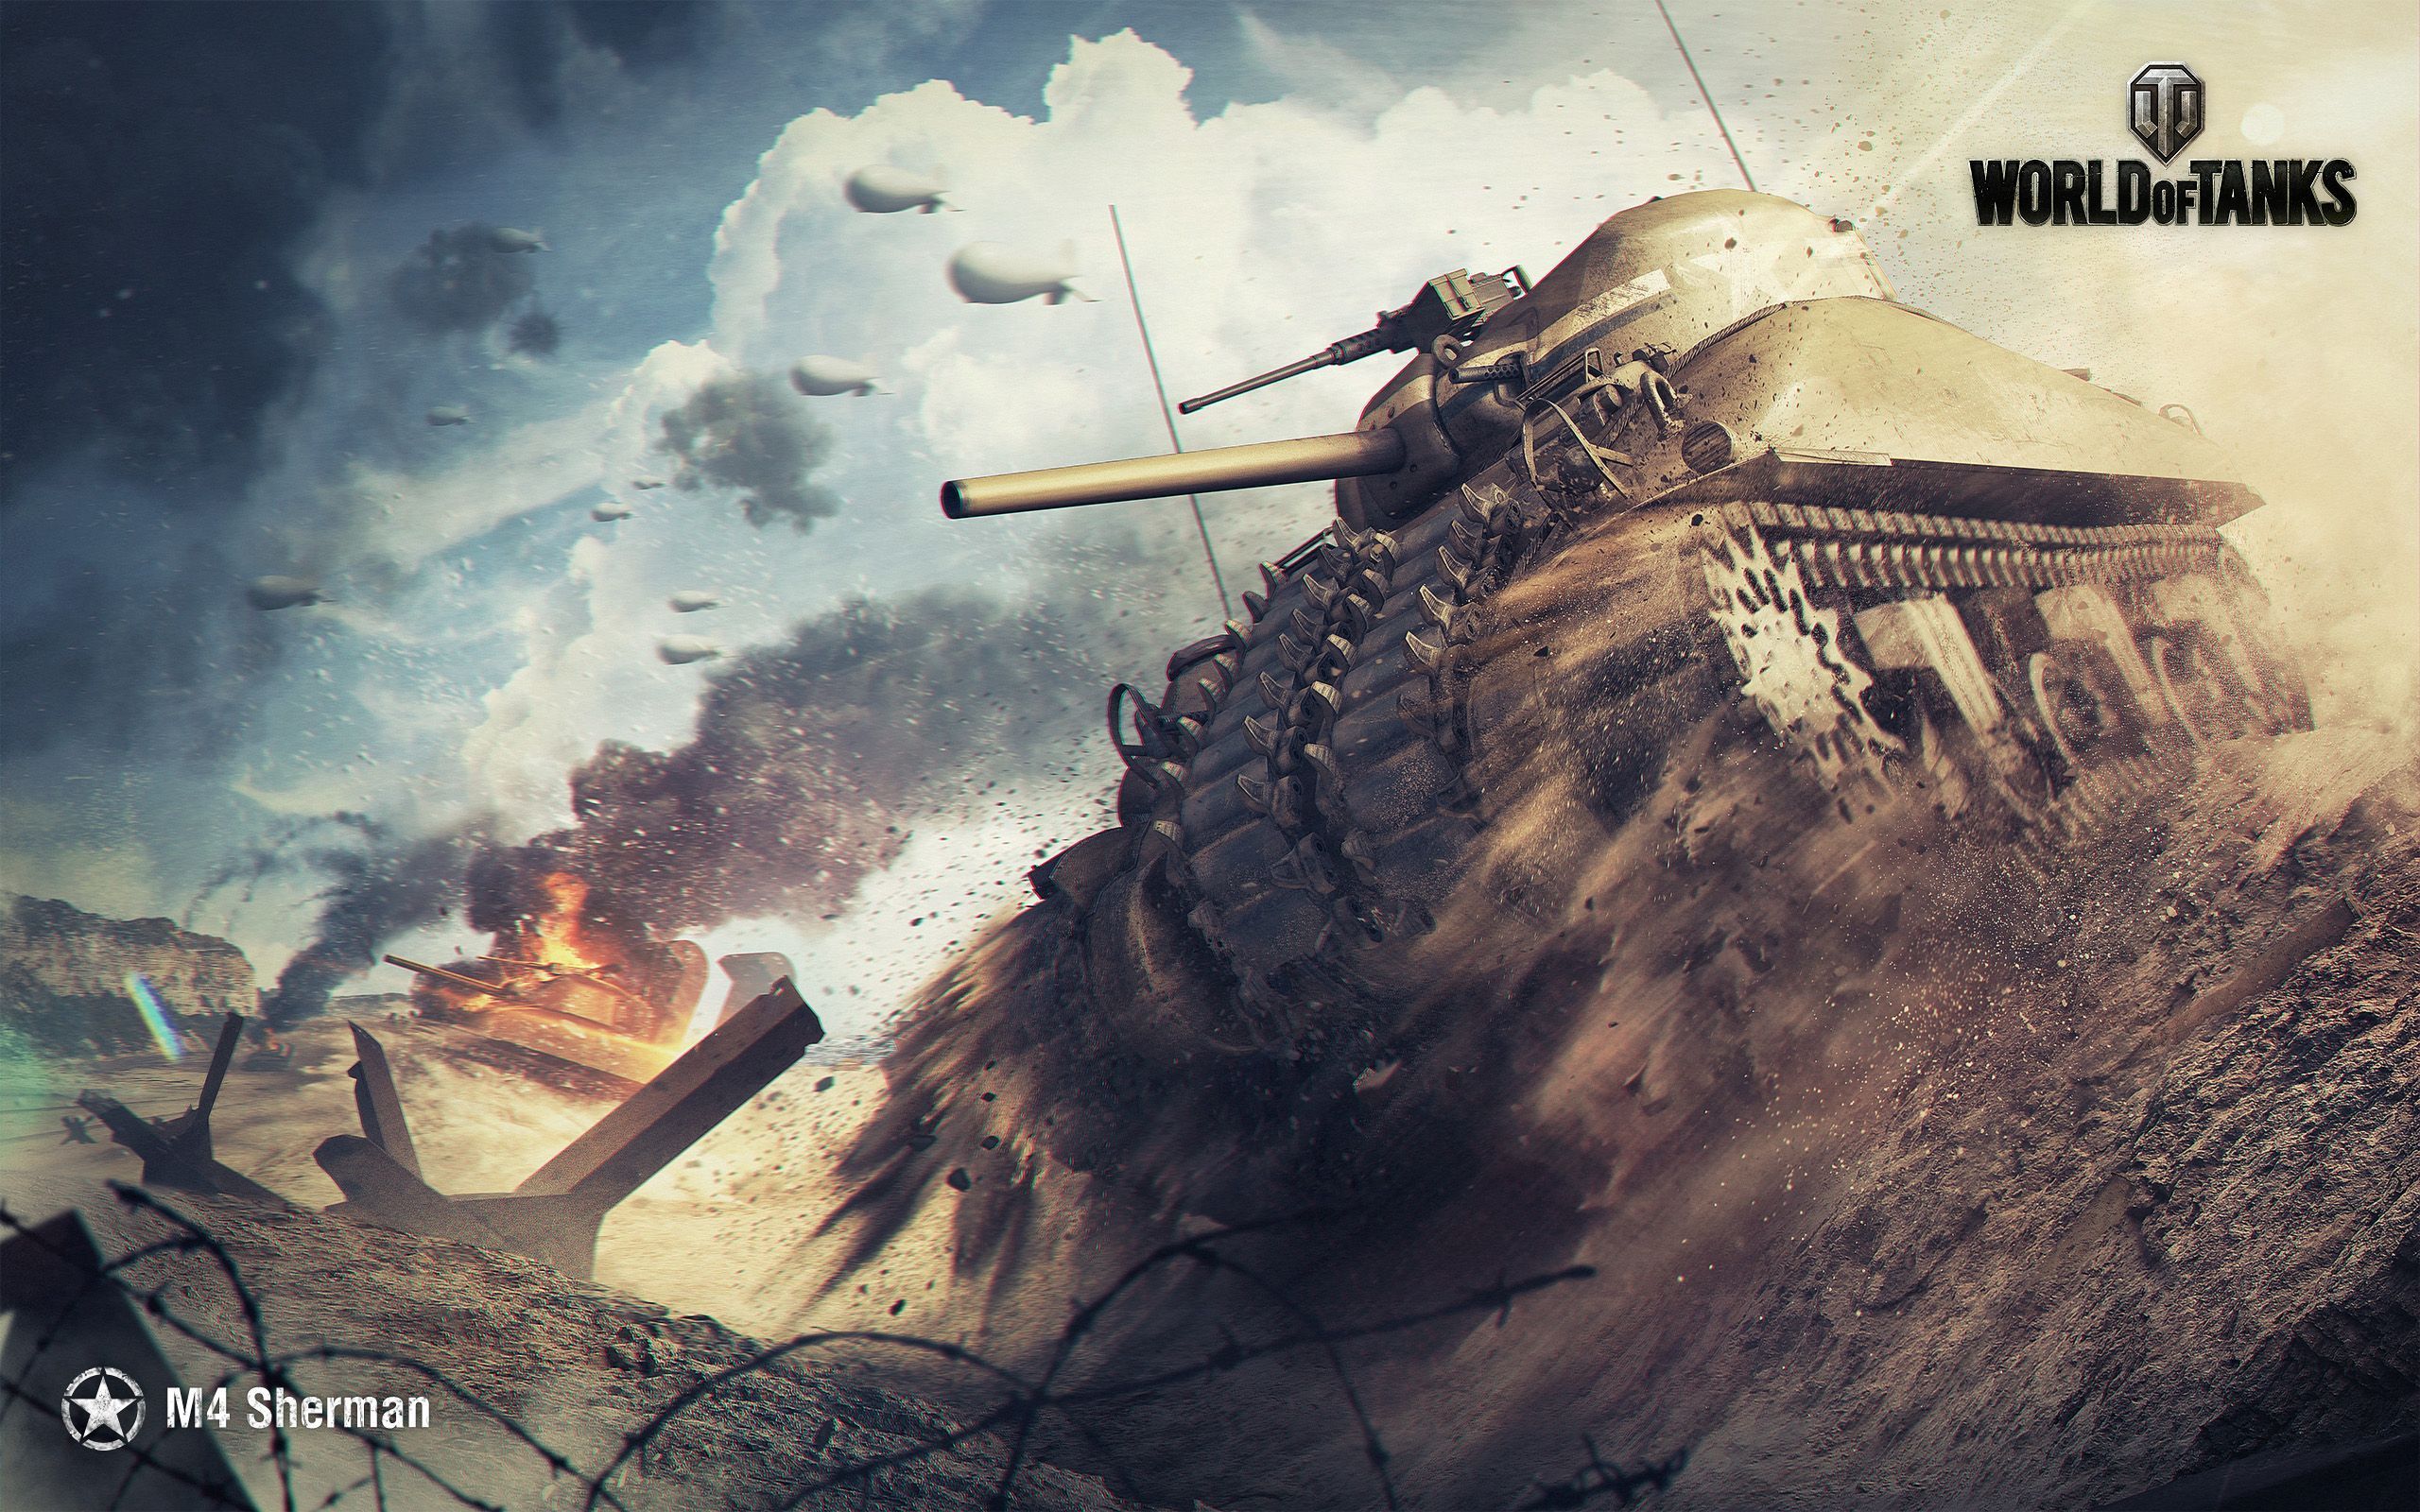 M4 Sherman World of Tanks Wallpapers HD Backgrounds